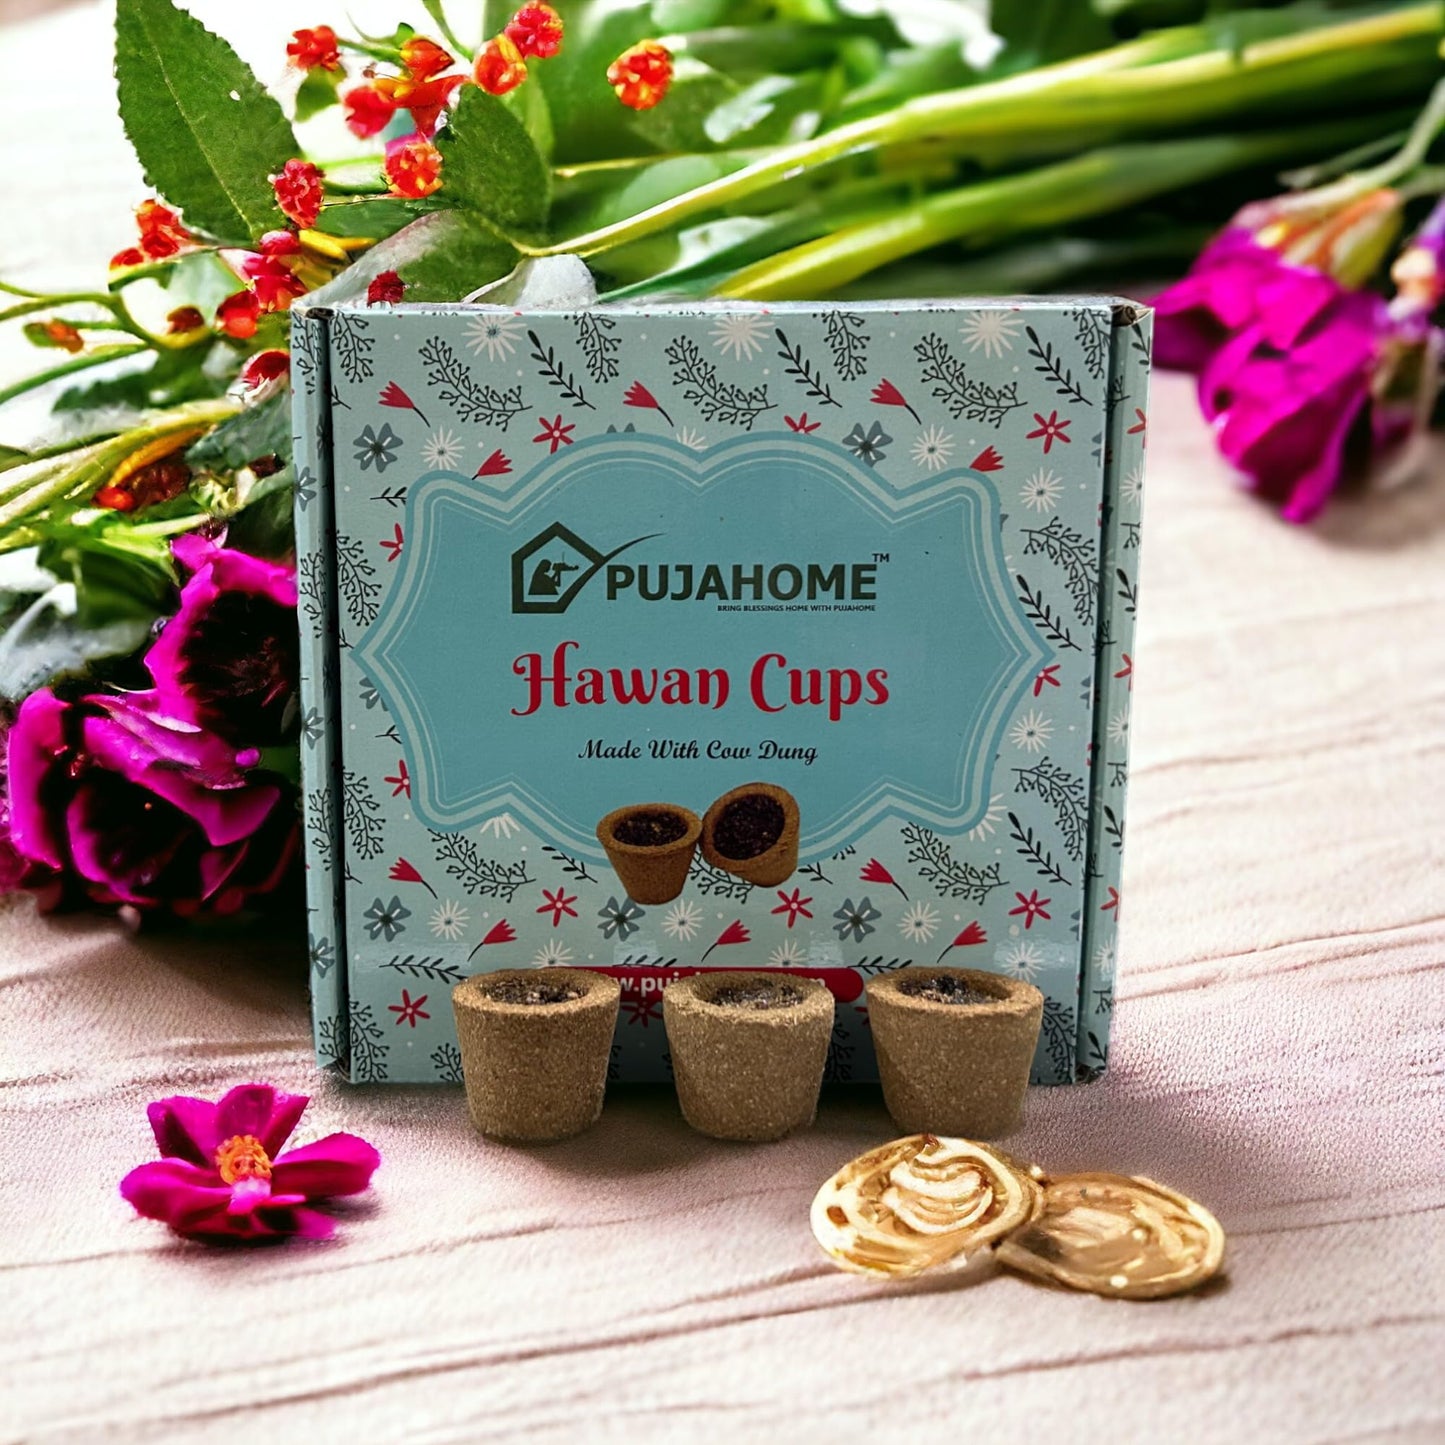 Pujahome Premium Loban/Guggal Fragrance Hawan Cups Made with Cow Dung (12 Cups Per Pack + Free Holder)